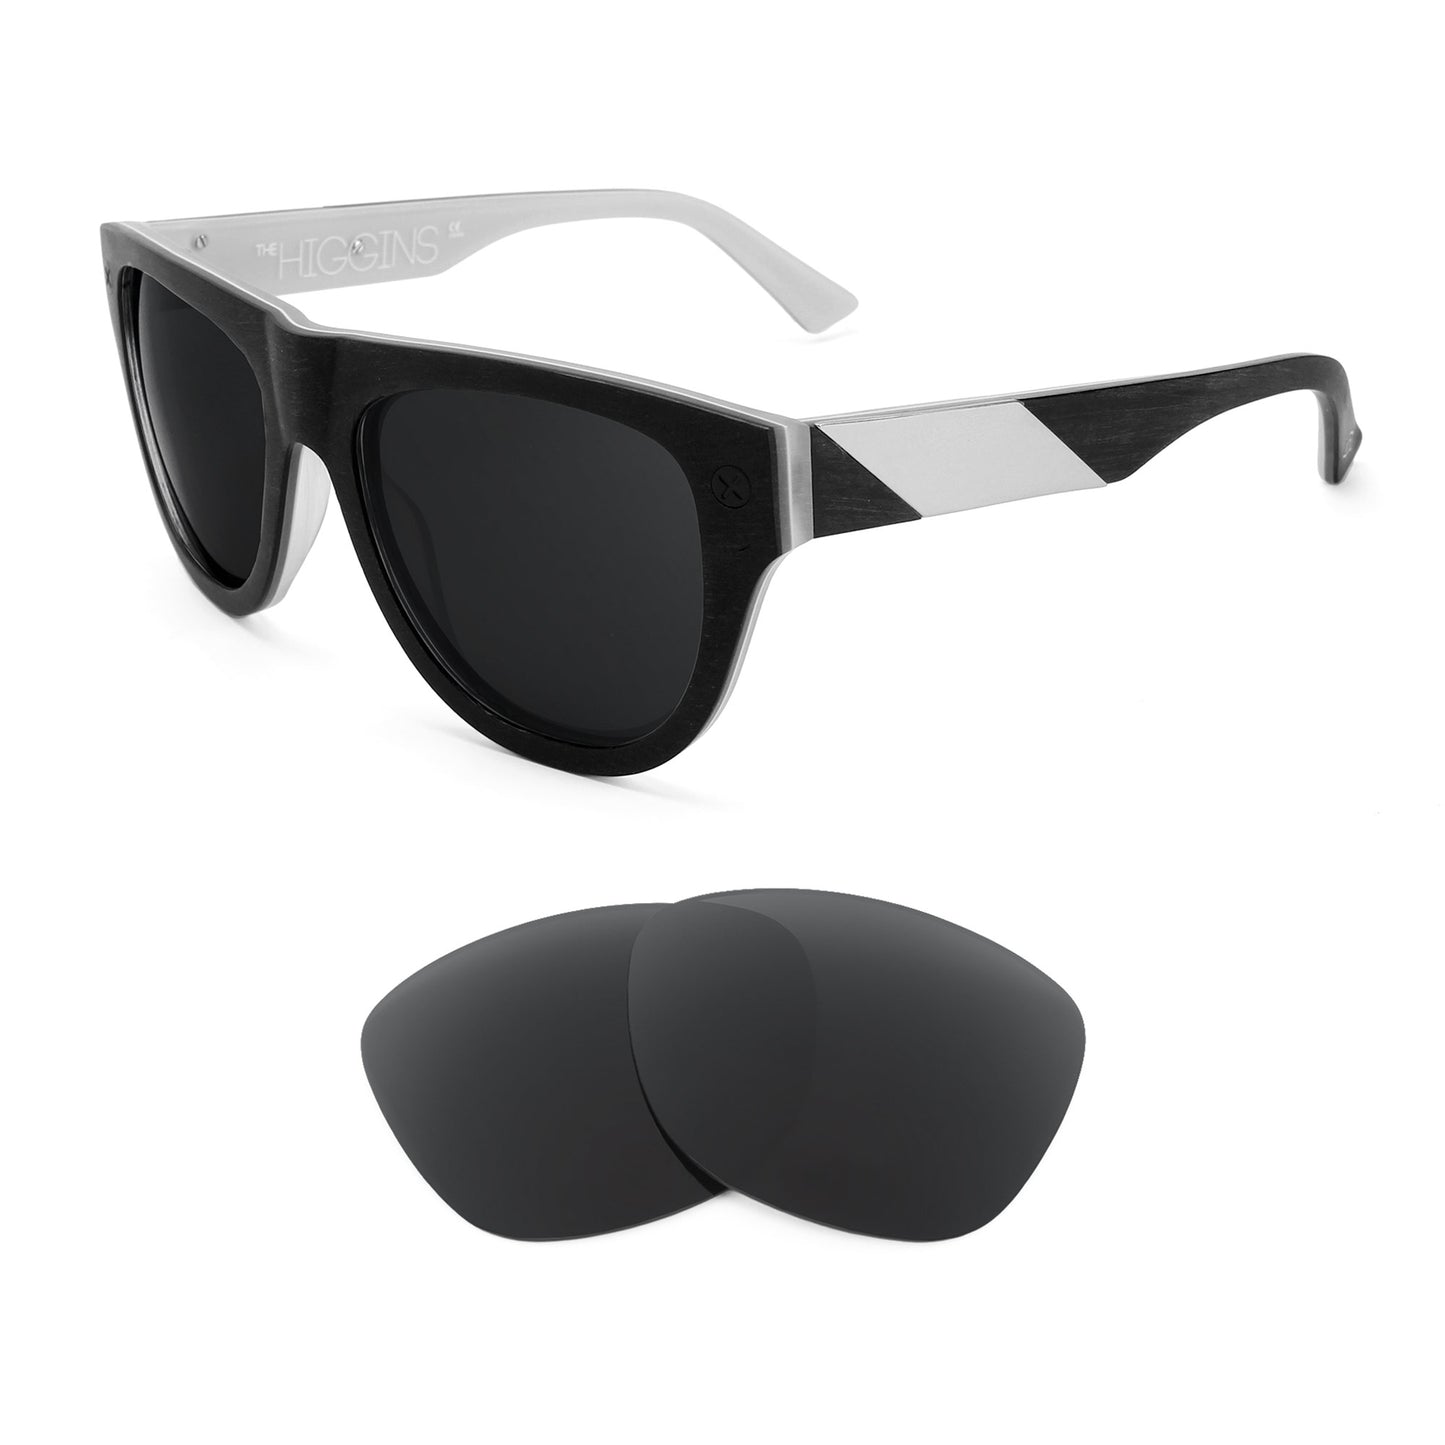 100% Higgins sunglasses with replacement lenses